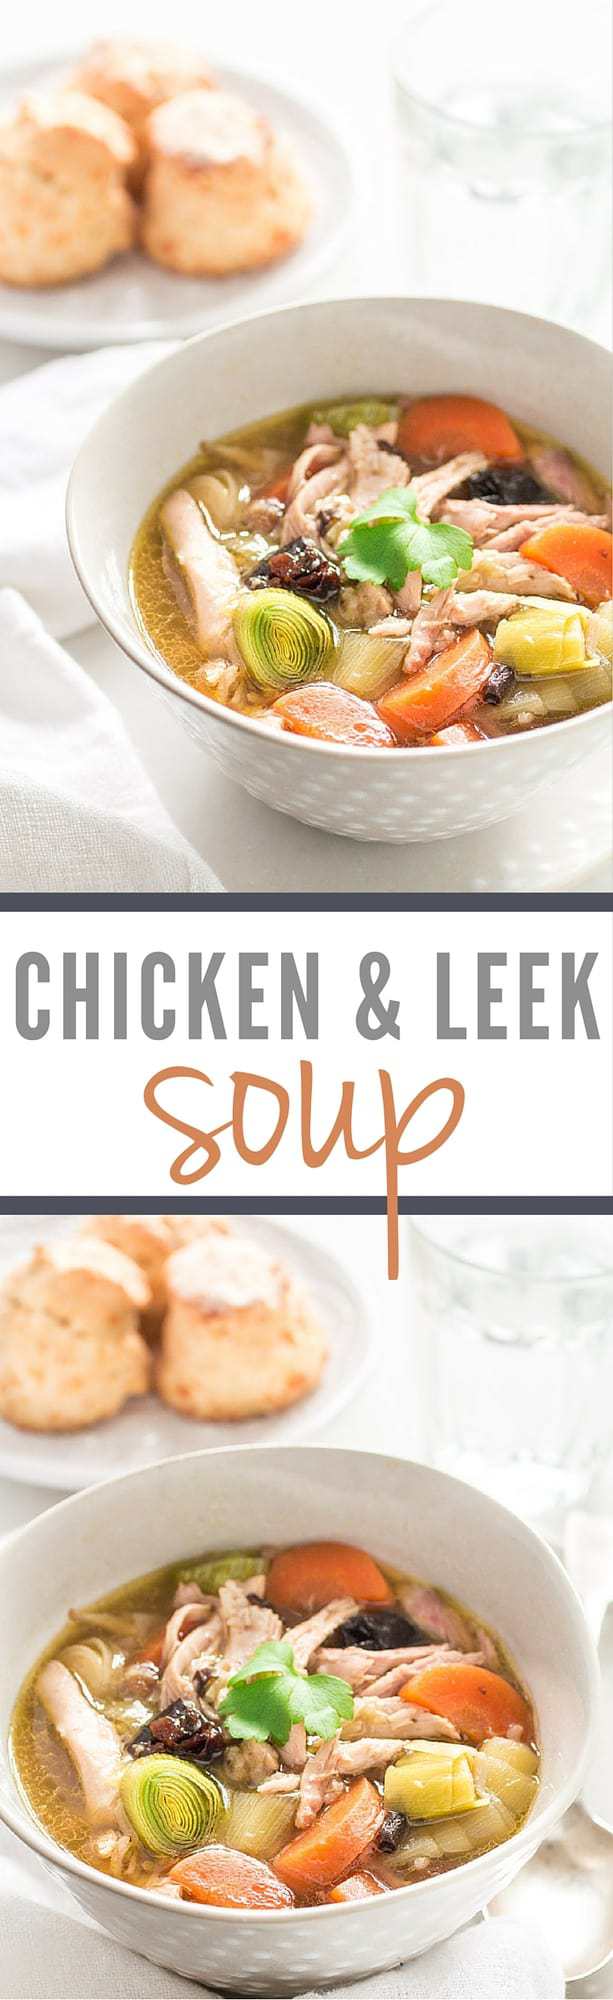 Chicken and Leek Soup | Recipes From A Pantry